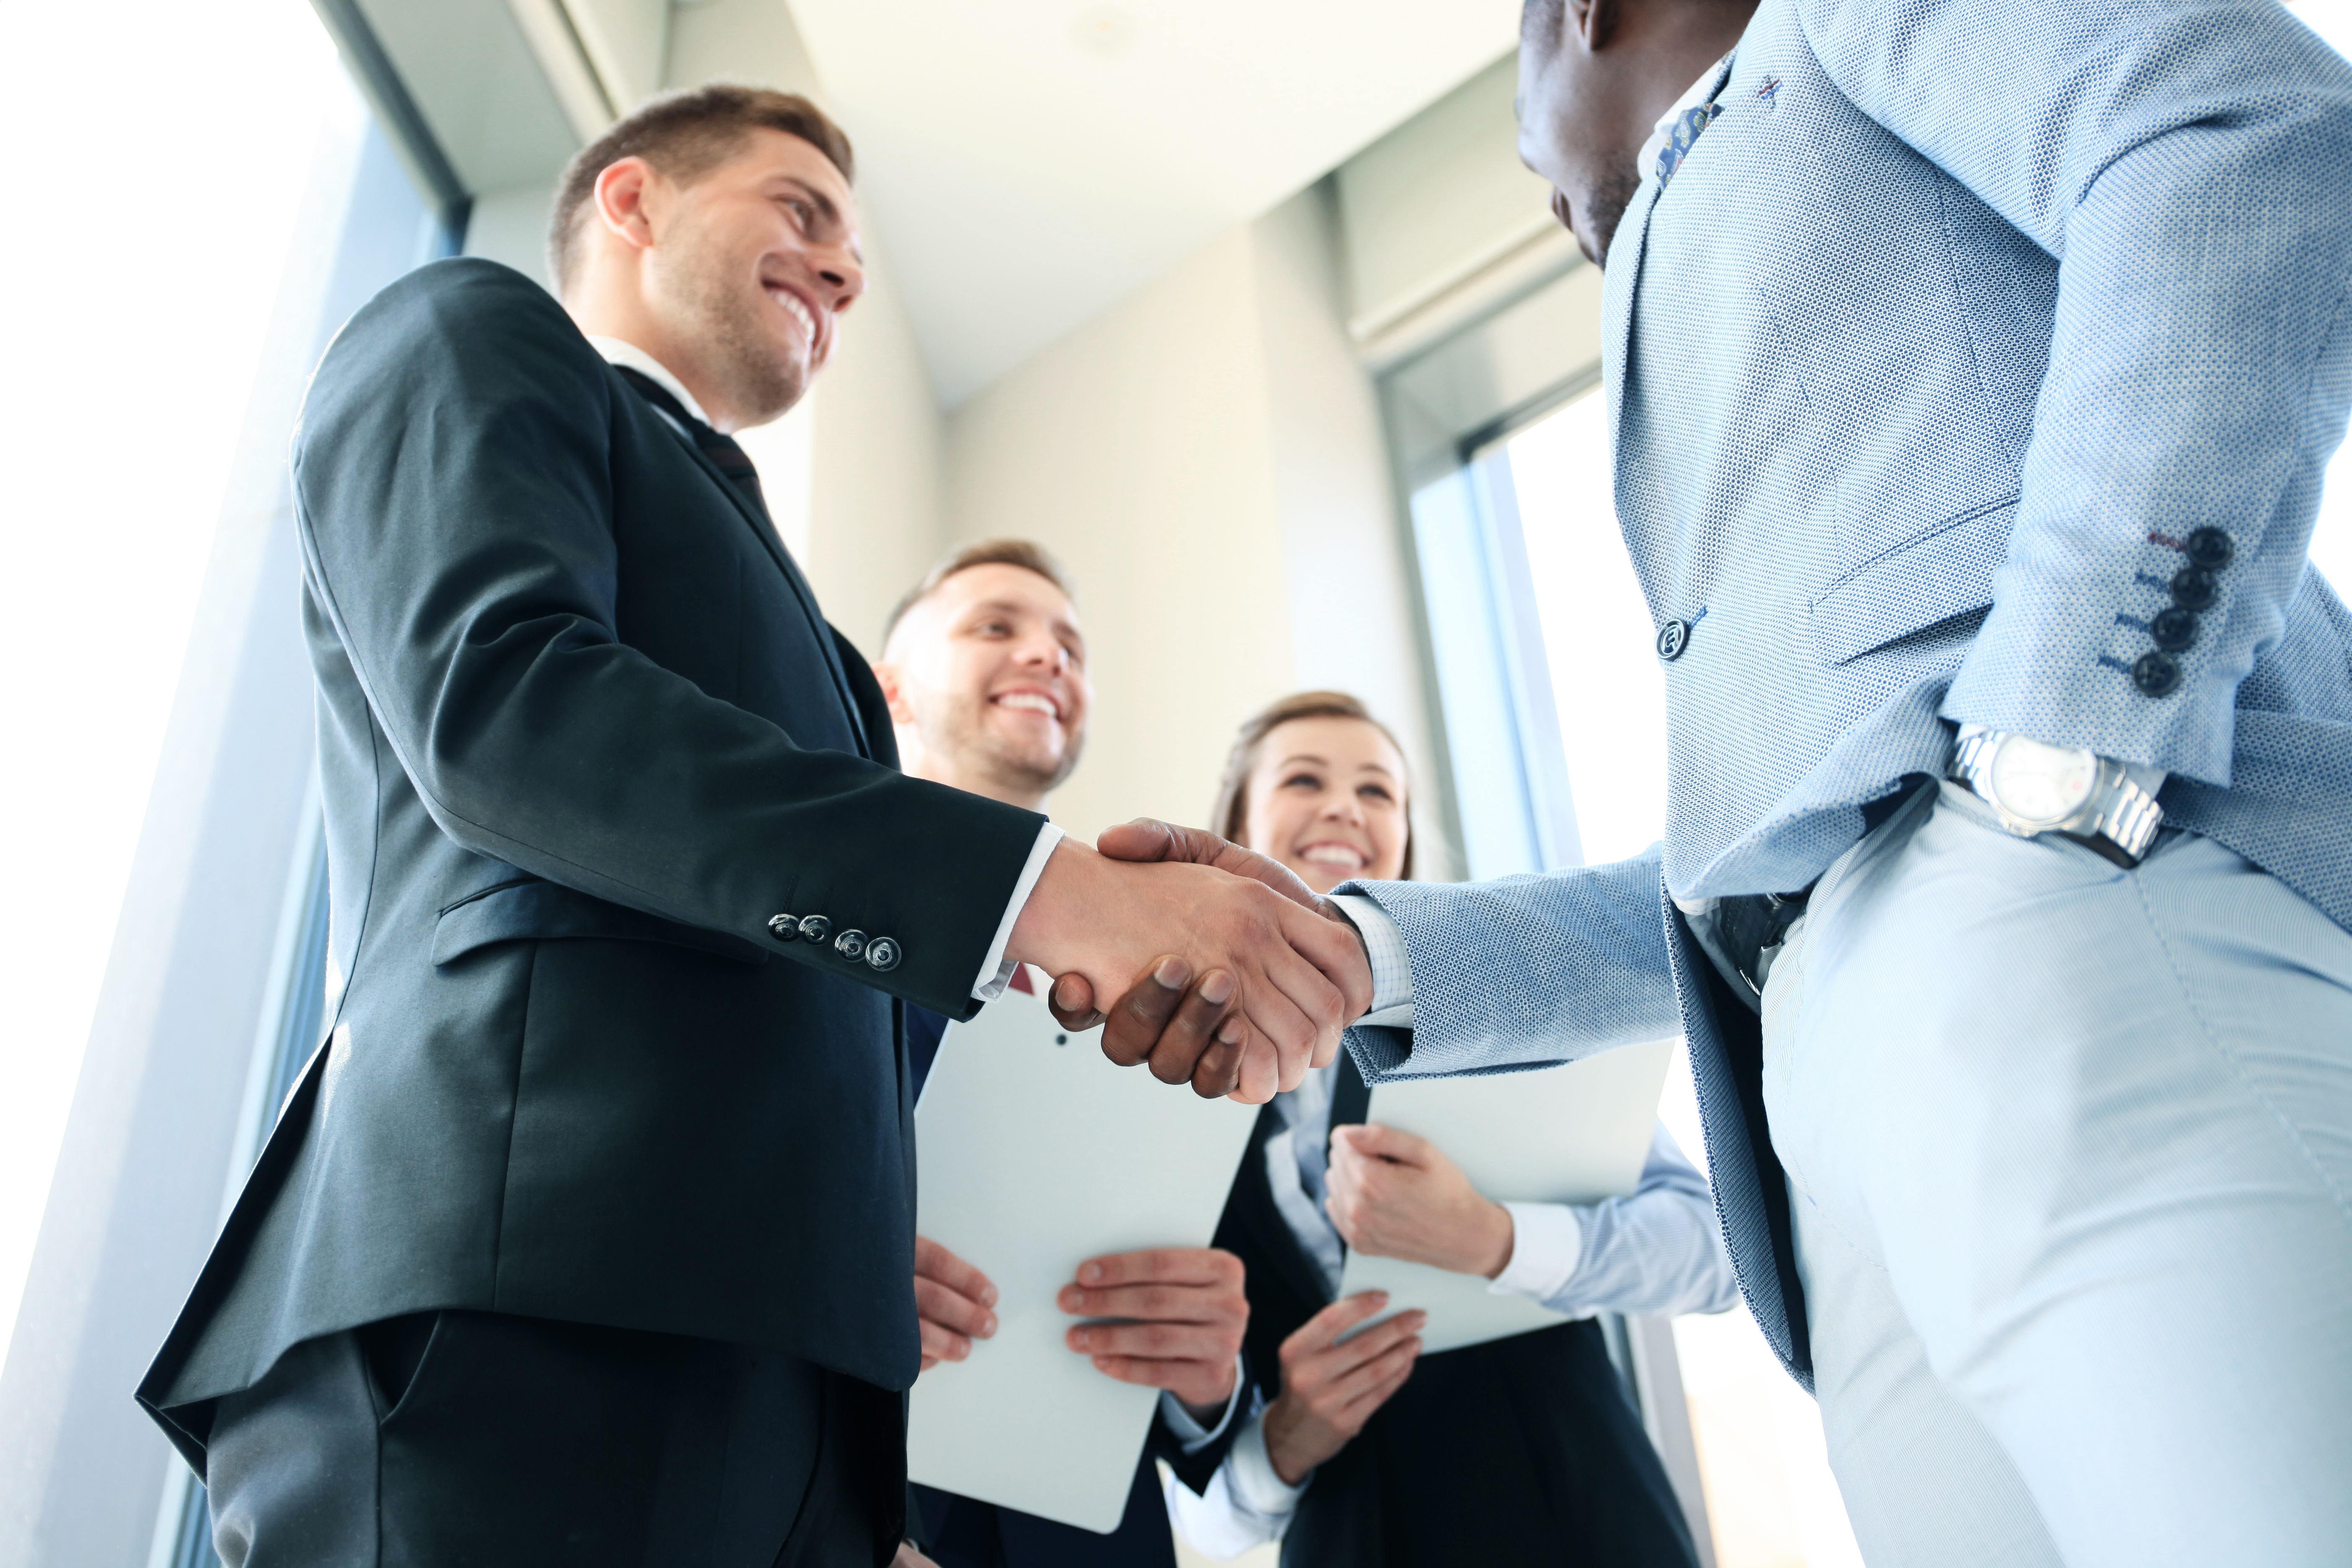 Two men in suits shaking hands as two other colleagues smile beside them | Source: Shutterstock